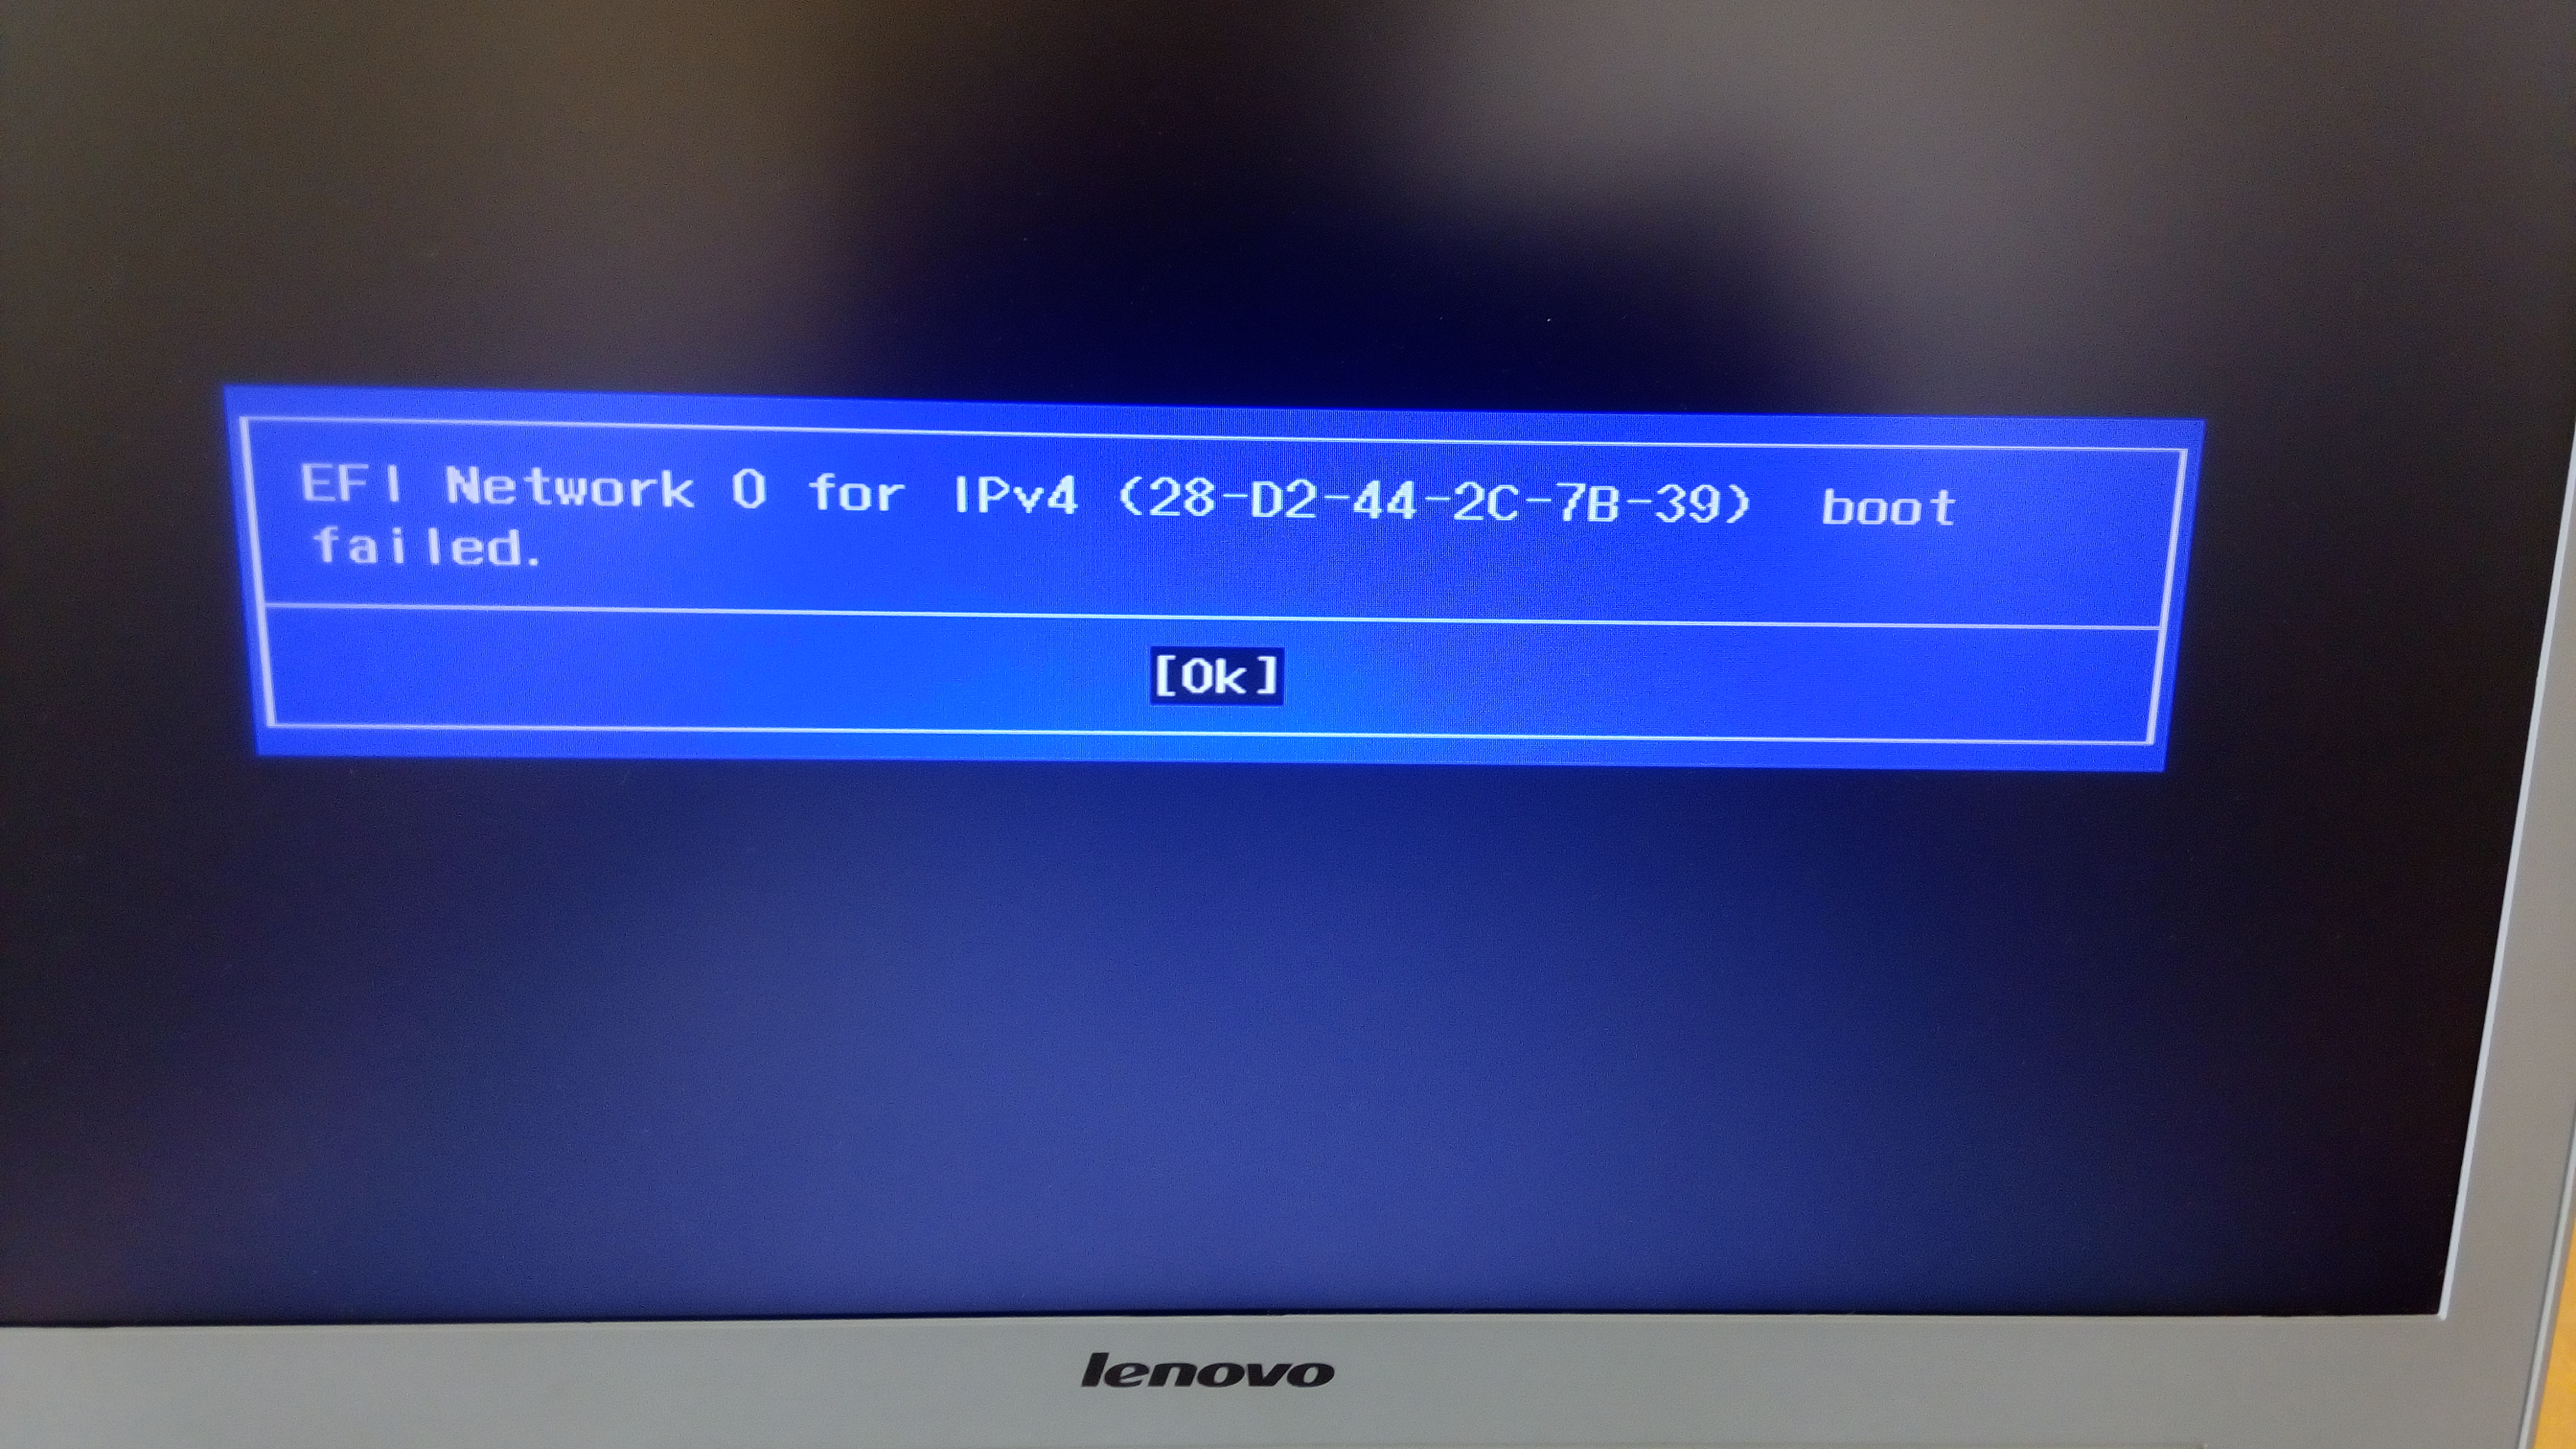 Pxe over ipv4. EFI PXE Network. EFI PXE Network Lenovo. Network Boot. EFI PXE Network (84-a9-38-c9-CF-e6).